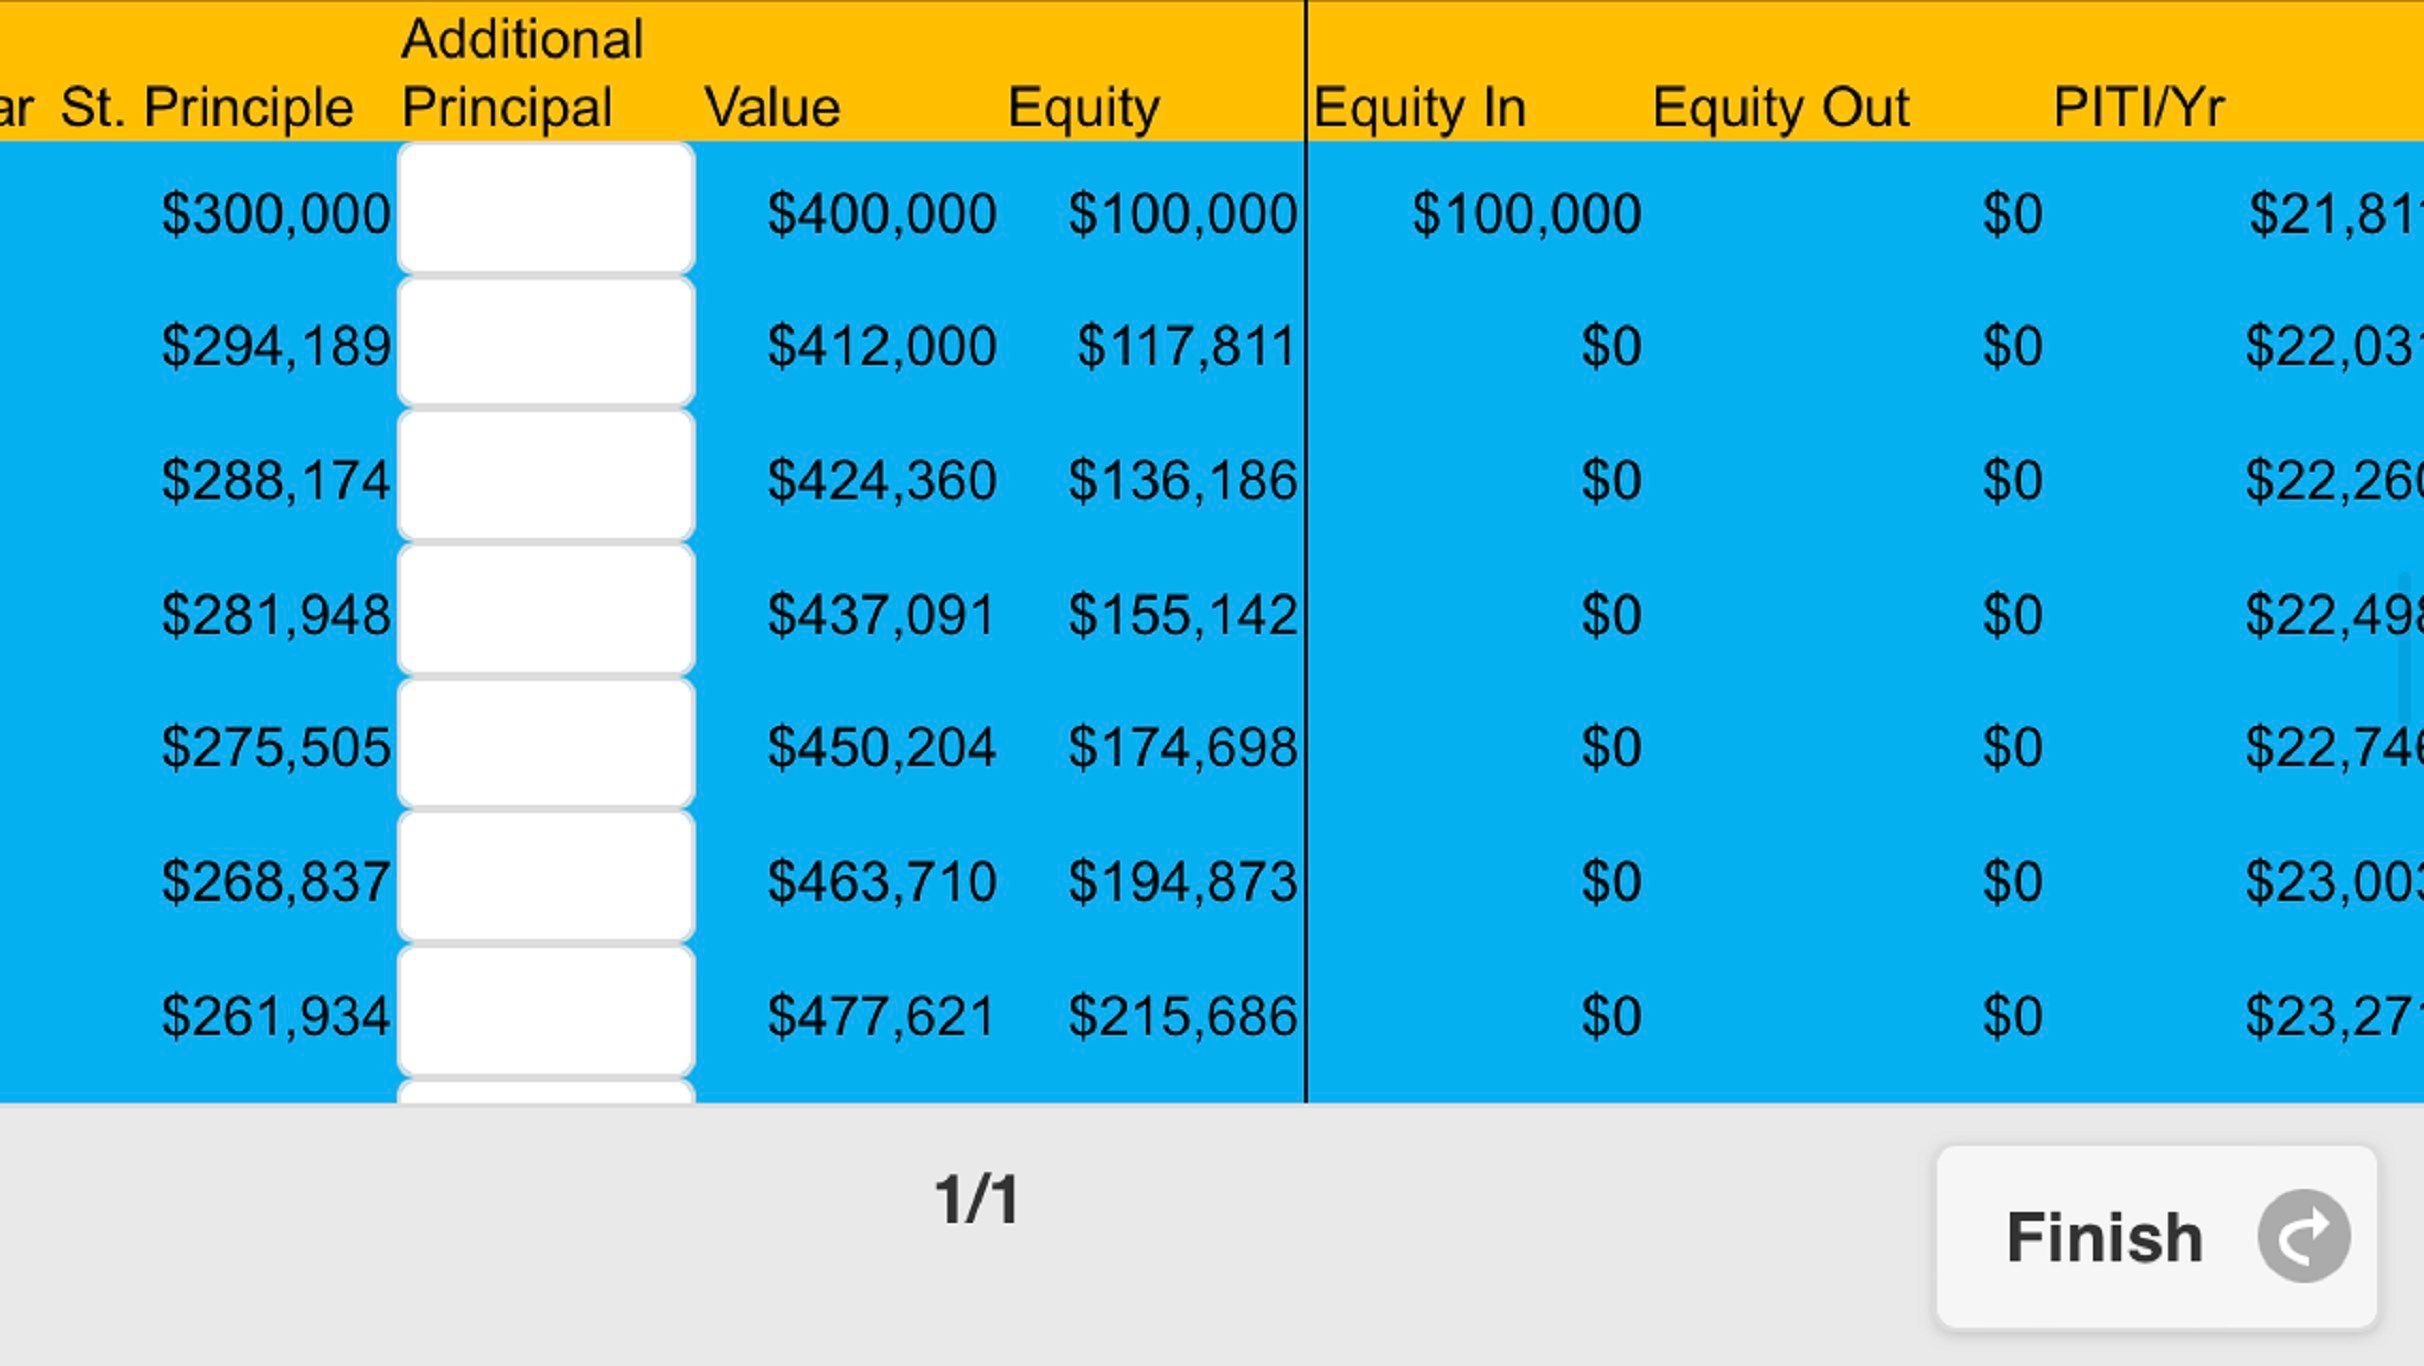 Amortization table of principle, equity and Payments.  Also allows the input of additional principal per year to see effect.